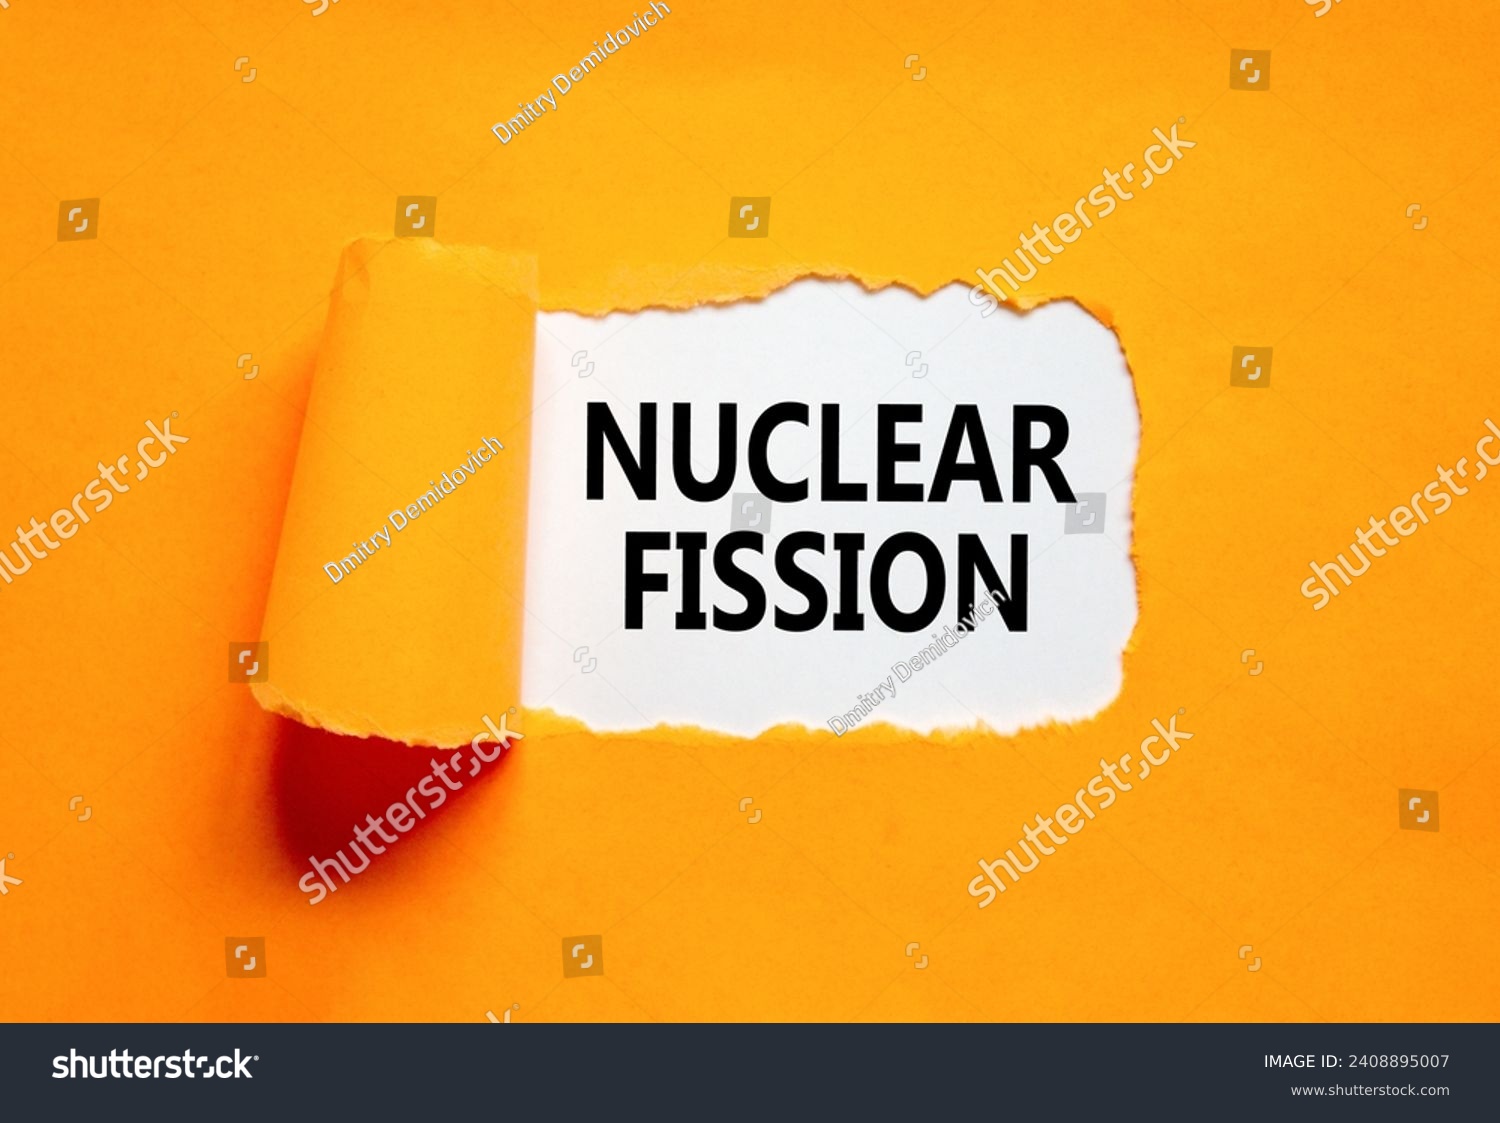 Nuclear fission symbol. Concept words Nuclear fission on beautiful white paper. Beautiful orange paper background. Business science nuclear fission concept. Copy space. #2408895007